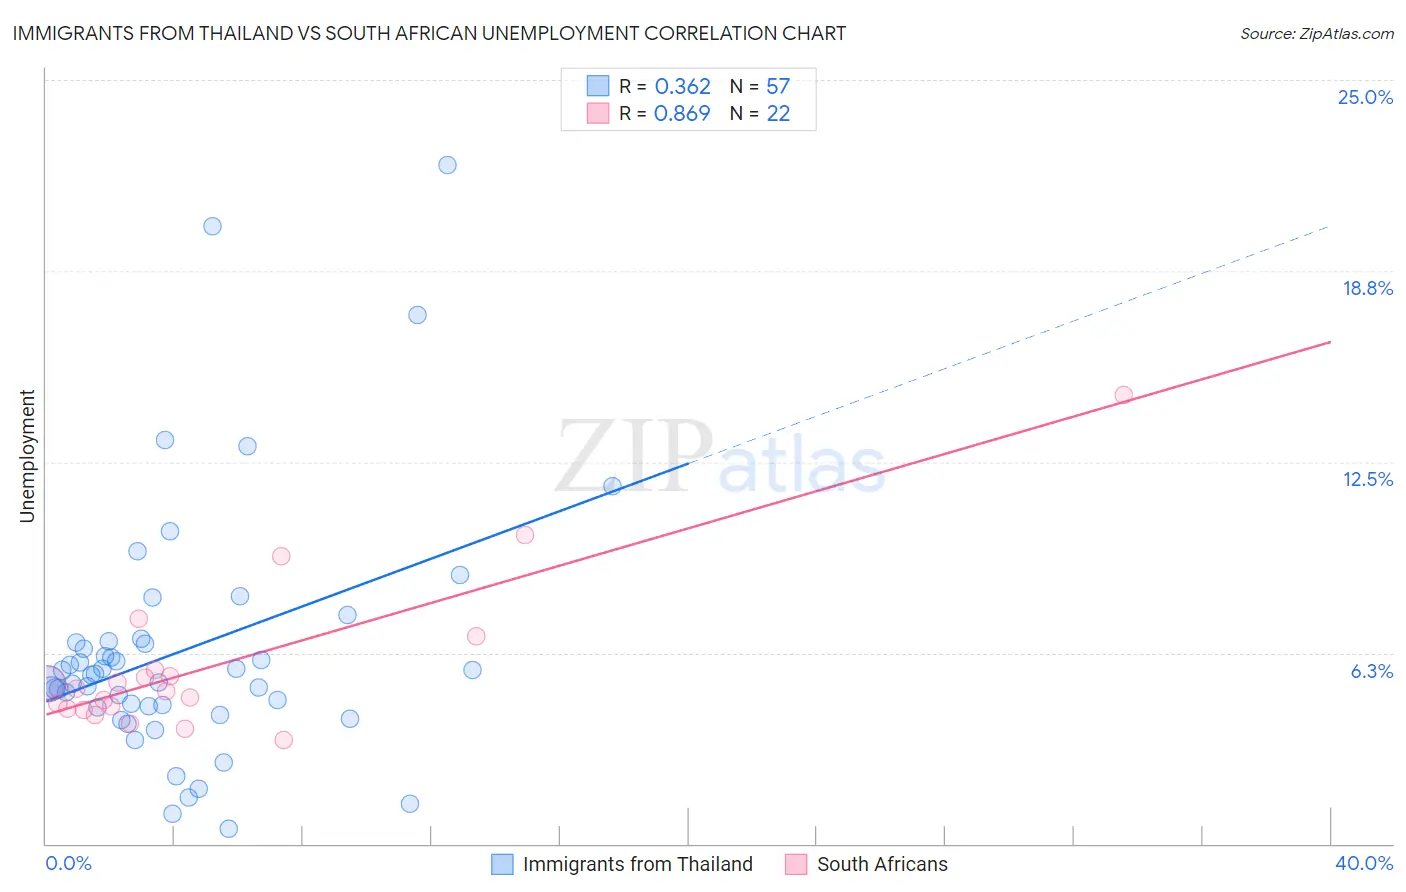 Immigrants from Thailand vs South African Unemployment